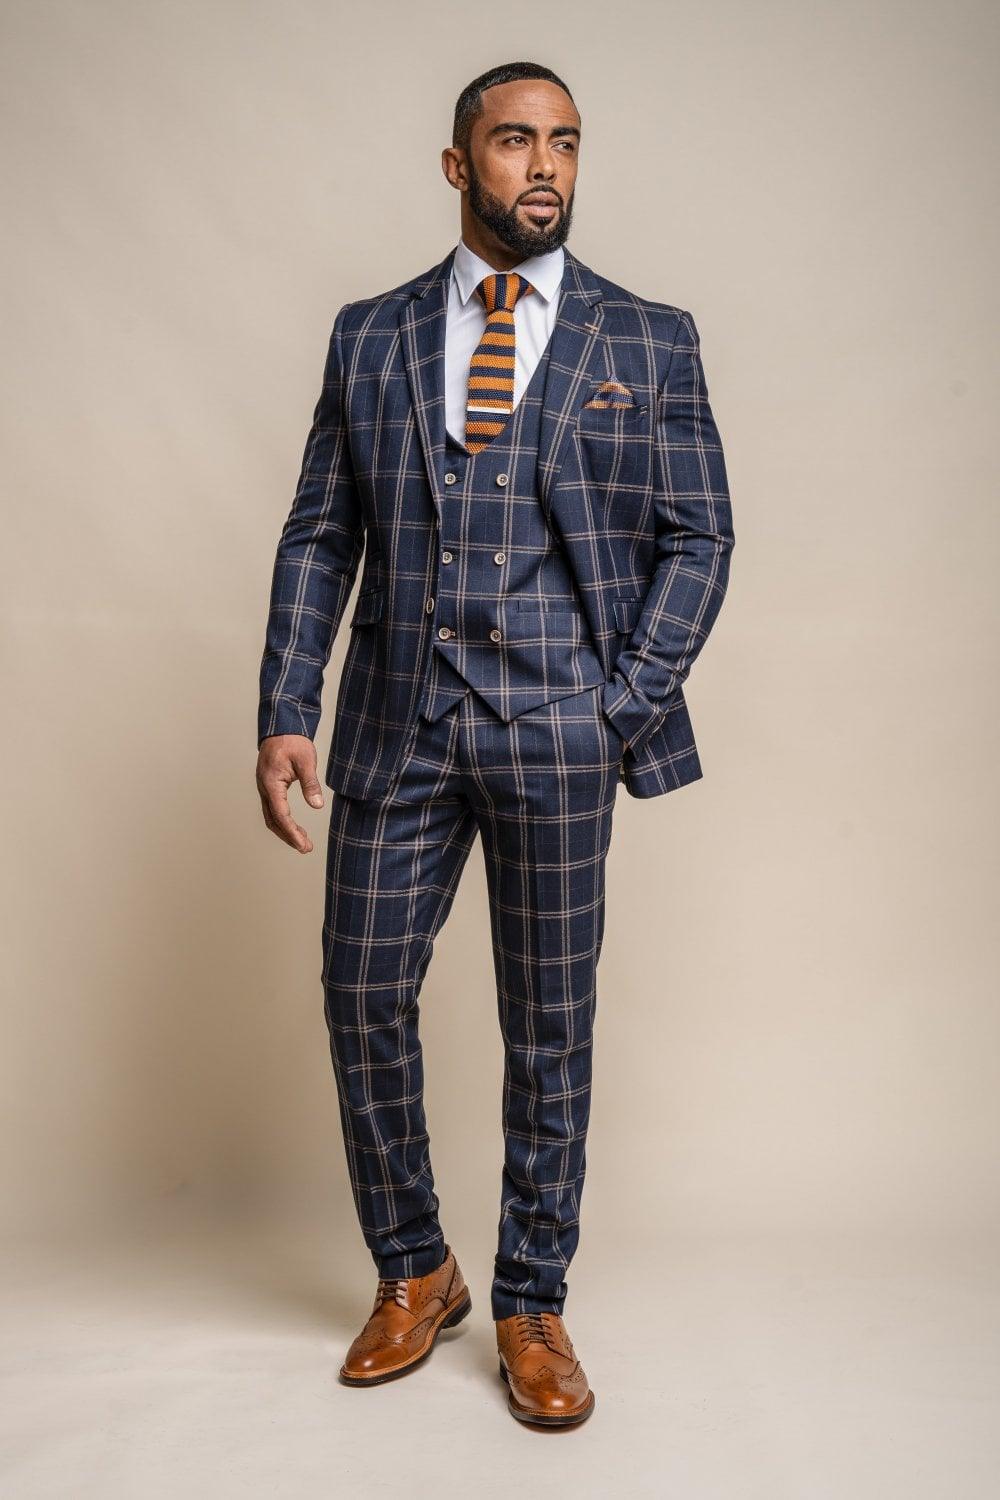 Navy Blazer with Grey Plaid Pants Outfits For Men (34 ideas